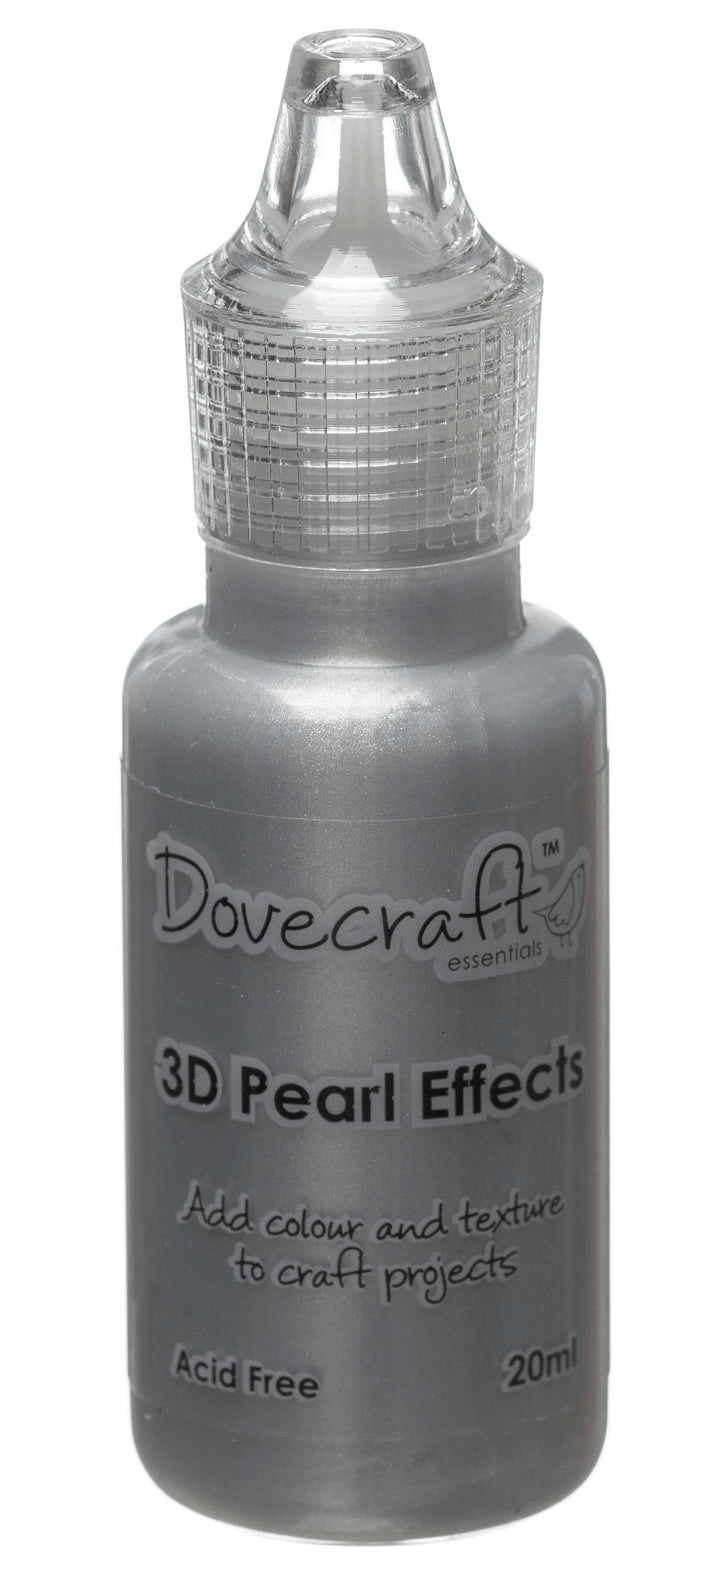 Dovecraft 3D Pearl Effects - 20ml